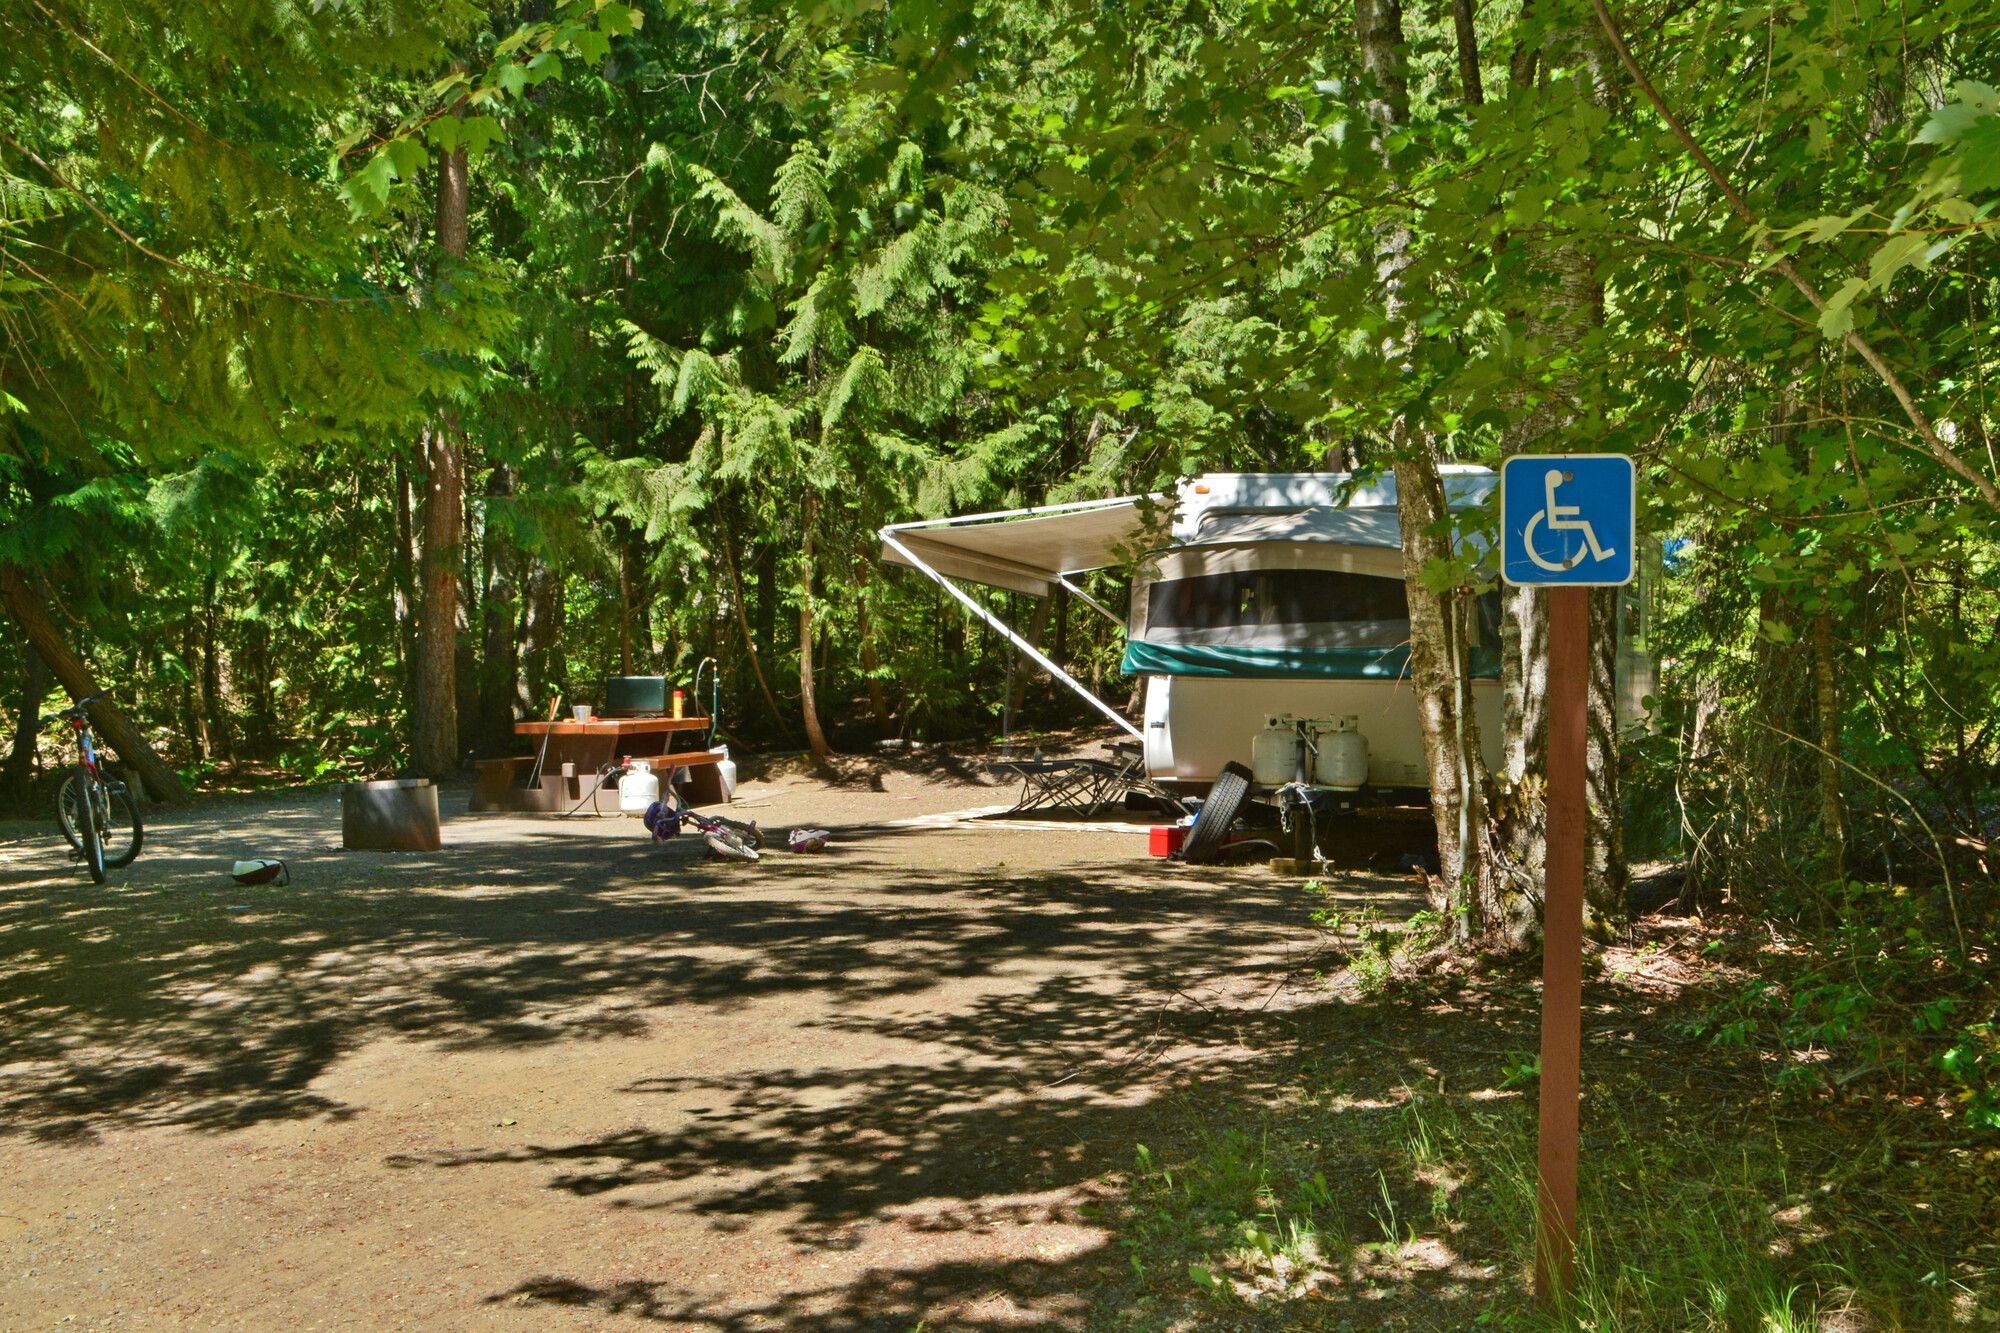 Designated accessible campsite is wide, firm and level throughout. The picnic table has an accessible overhanging. Shuswap Lake Park.